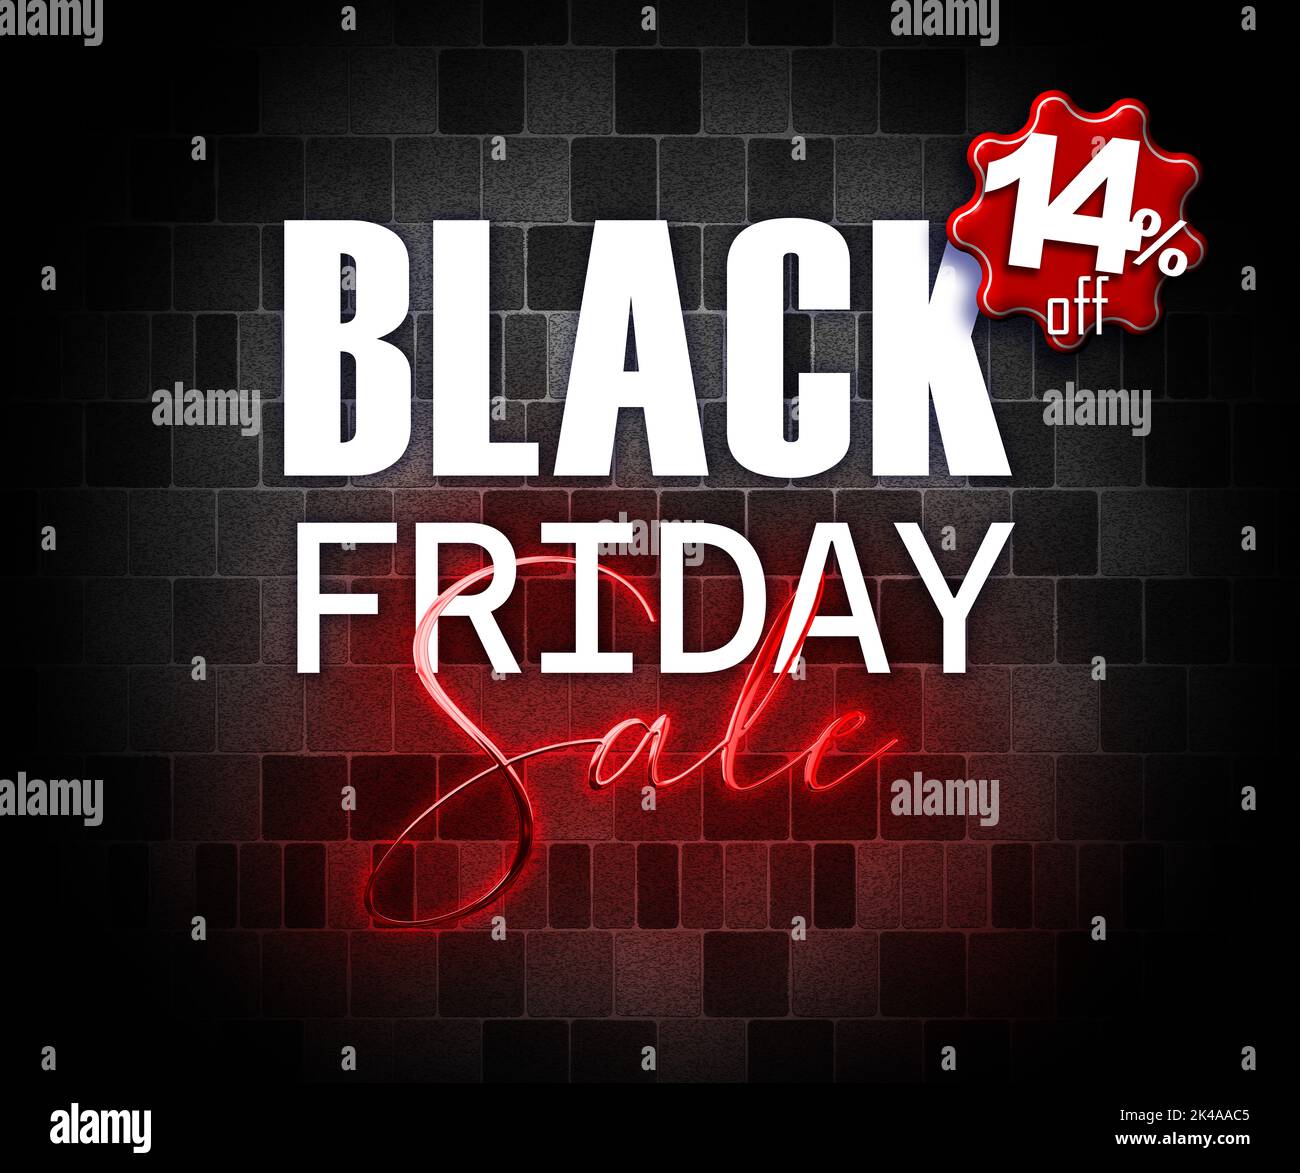 illustration with 3d elements black friday promotion banner 14 percent off sales increase Stock Photo